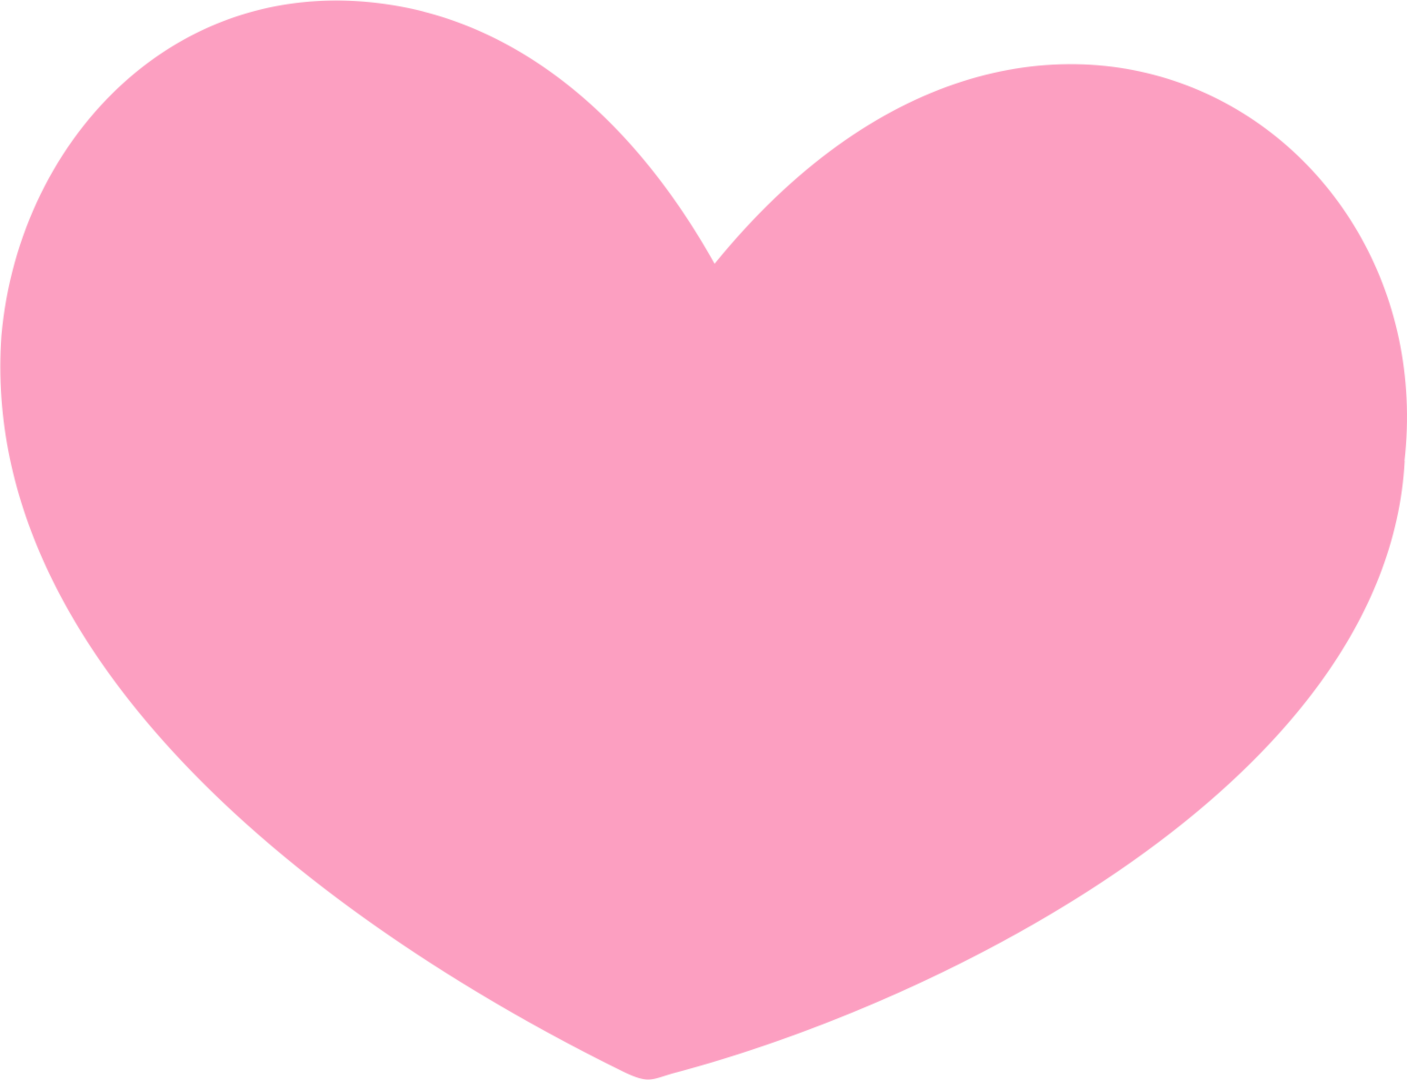 Free Pink Heart Png Download Free Pink Heart Png Png Images Free Cliparts On Clipart Library 2886